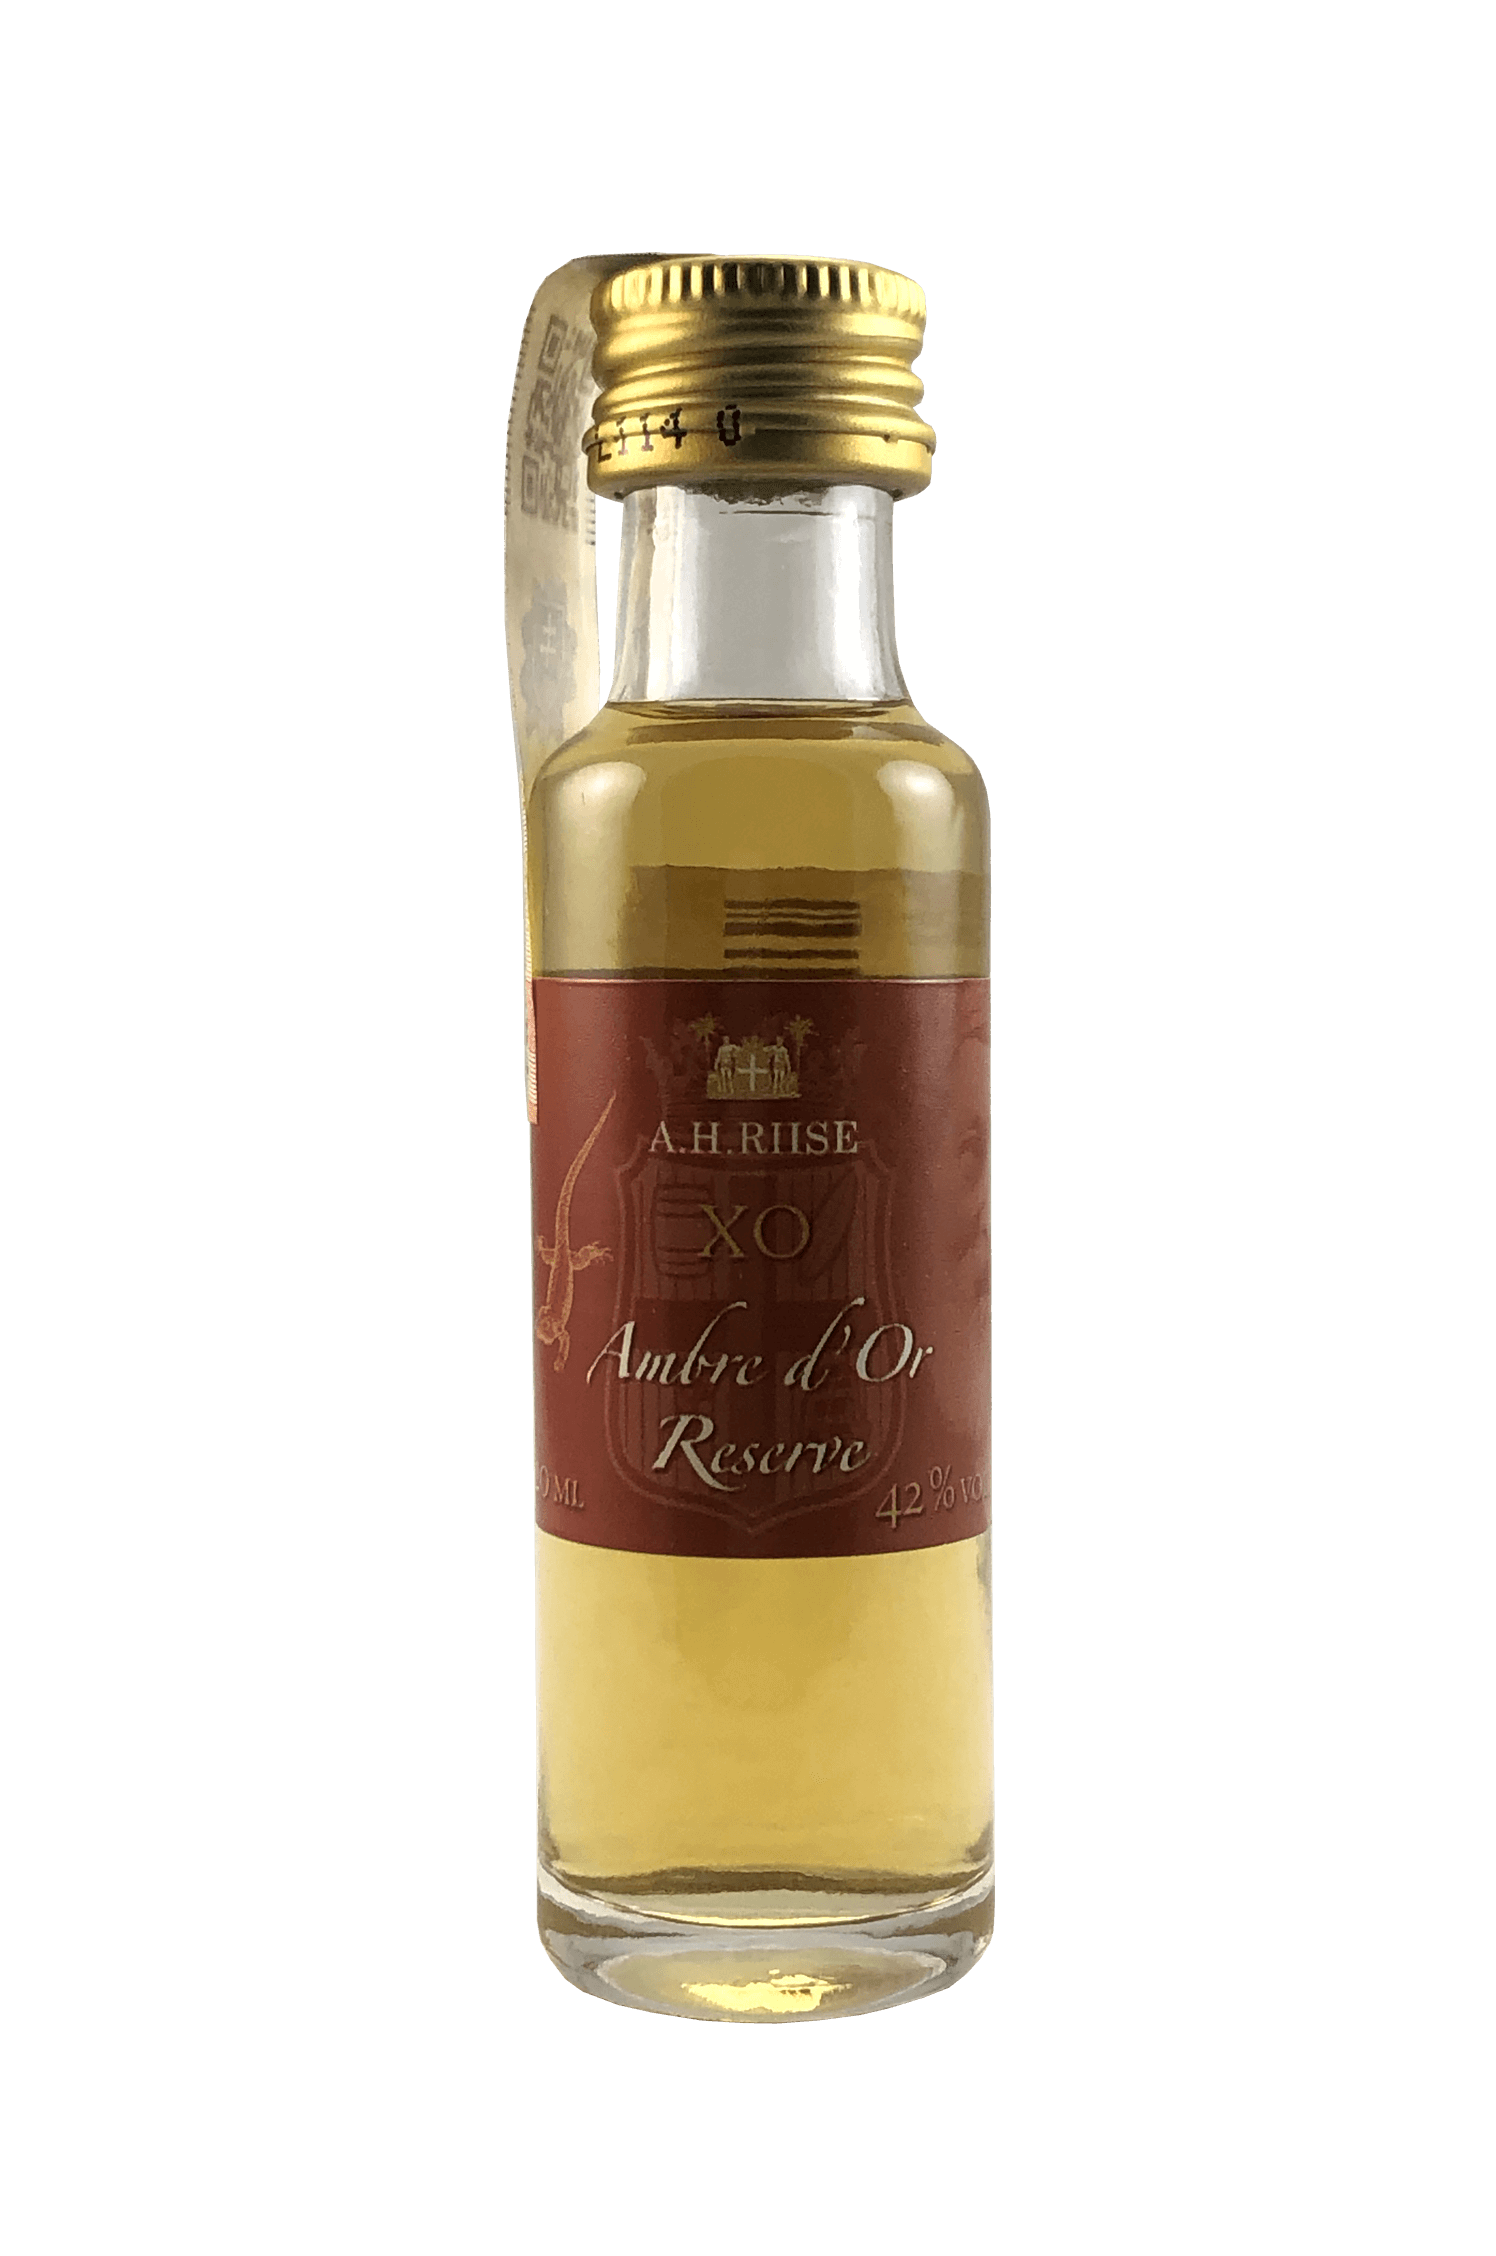 A.H.RIISE XO AMBRE D’OR RESERVE